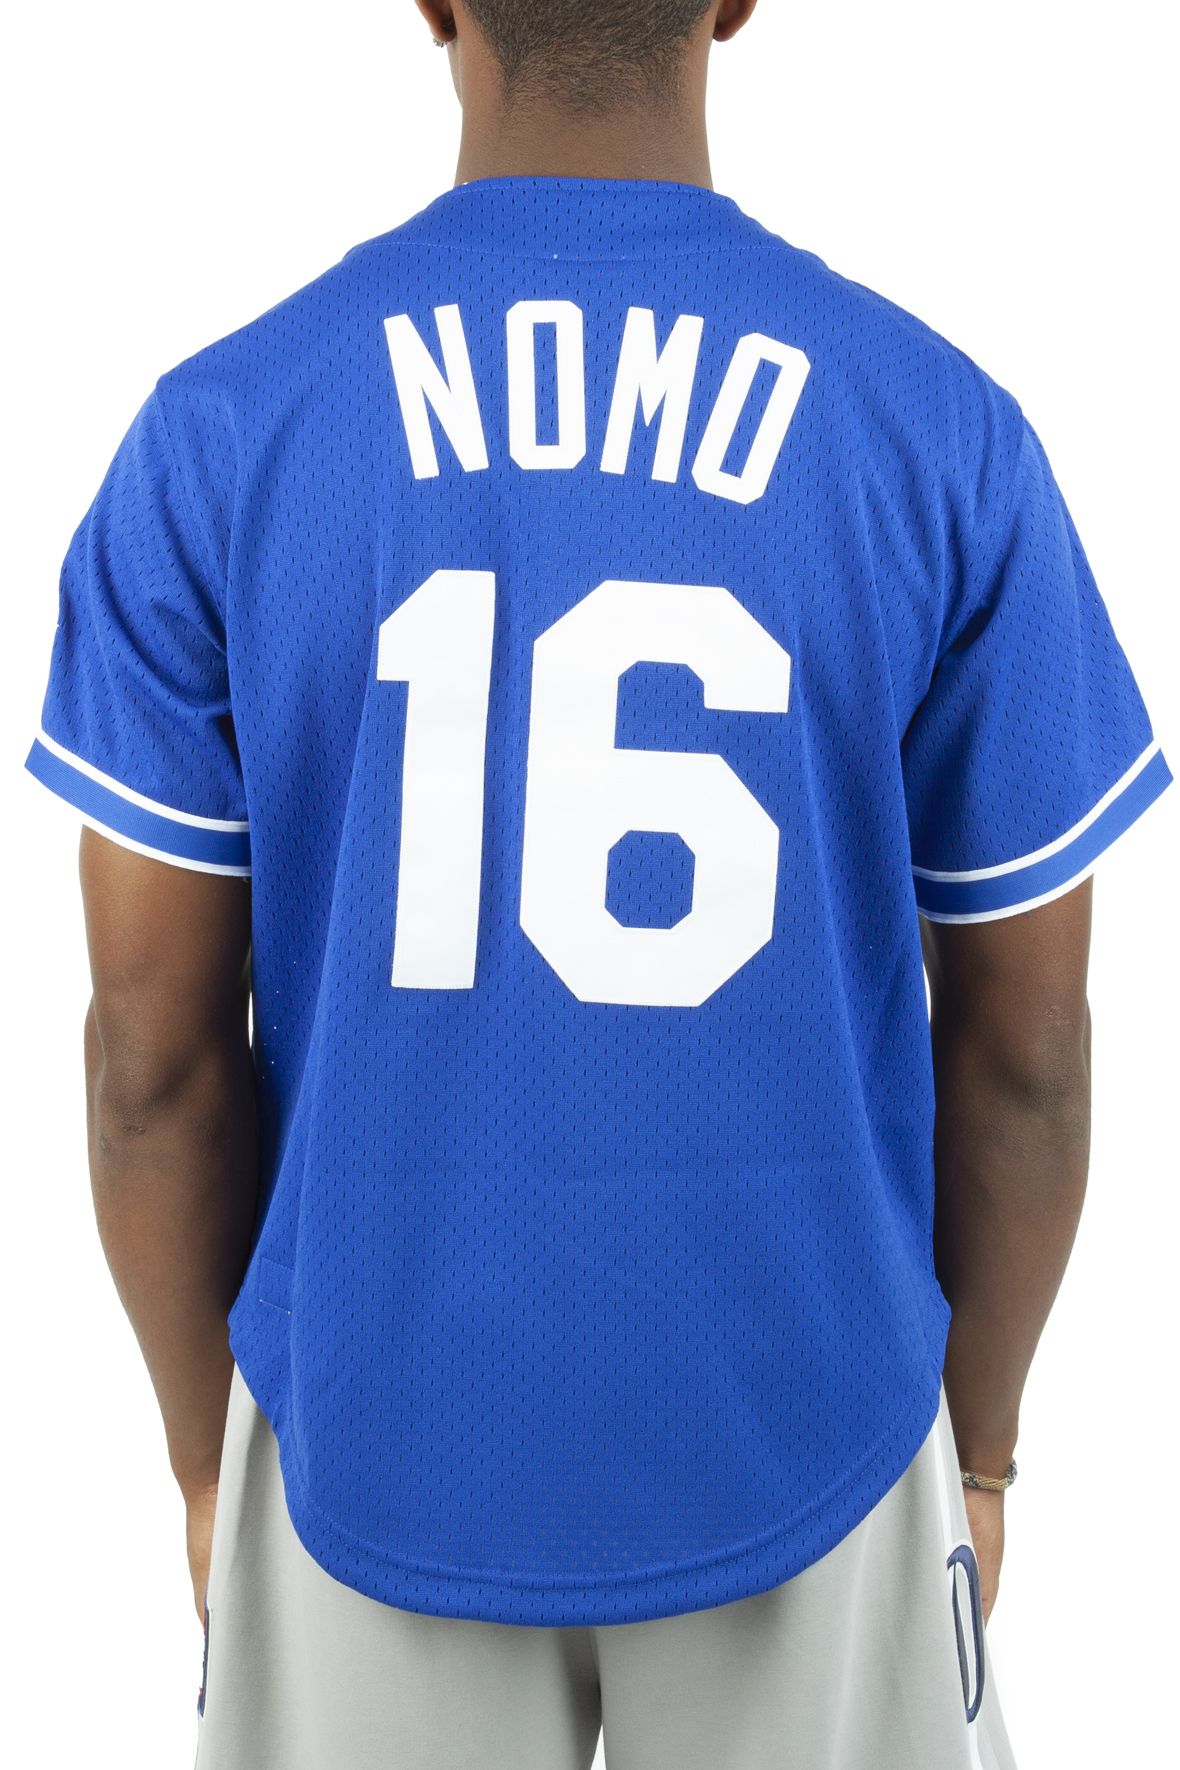 MITCHELL AND NESS Hideo Nomo Los Angeles Dodgers 1997 Authentic Jersey  ABBF3359-LAD97HNOROYA - Shiekh